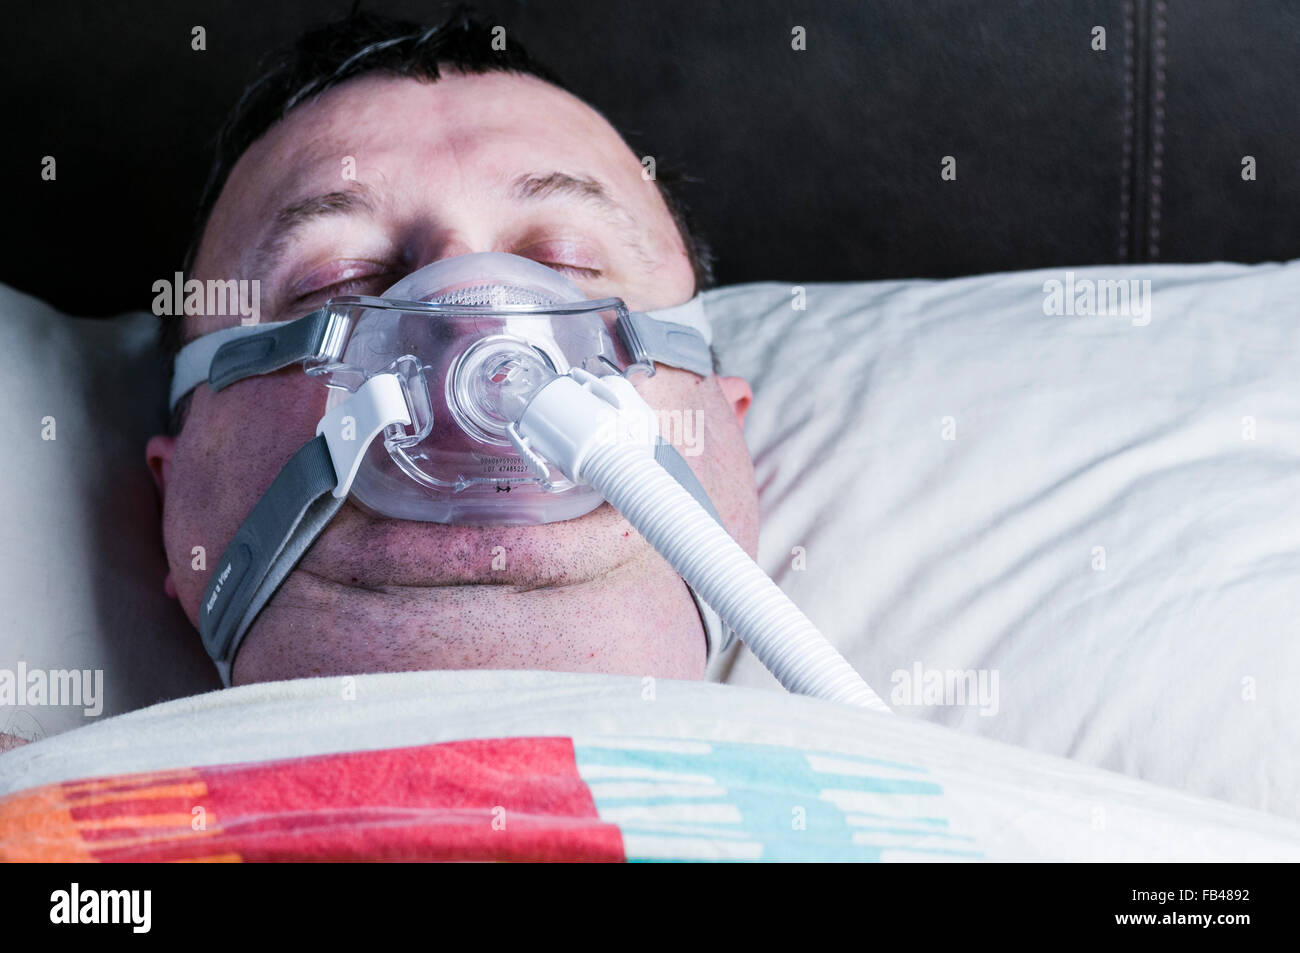 A middle-aged, overweight man wearing a CPAP mask while sleeping in bed Stock Photo